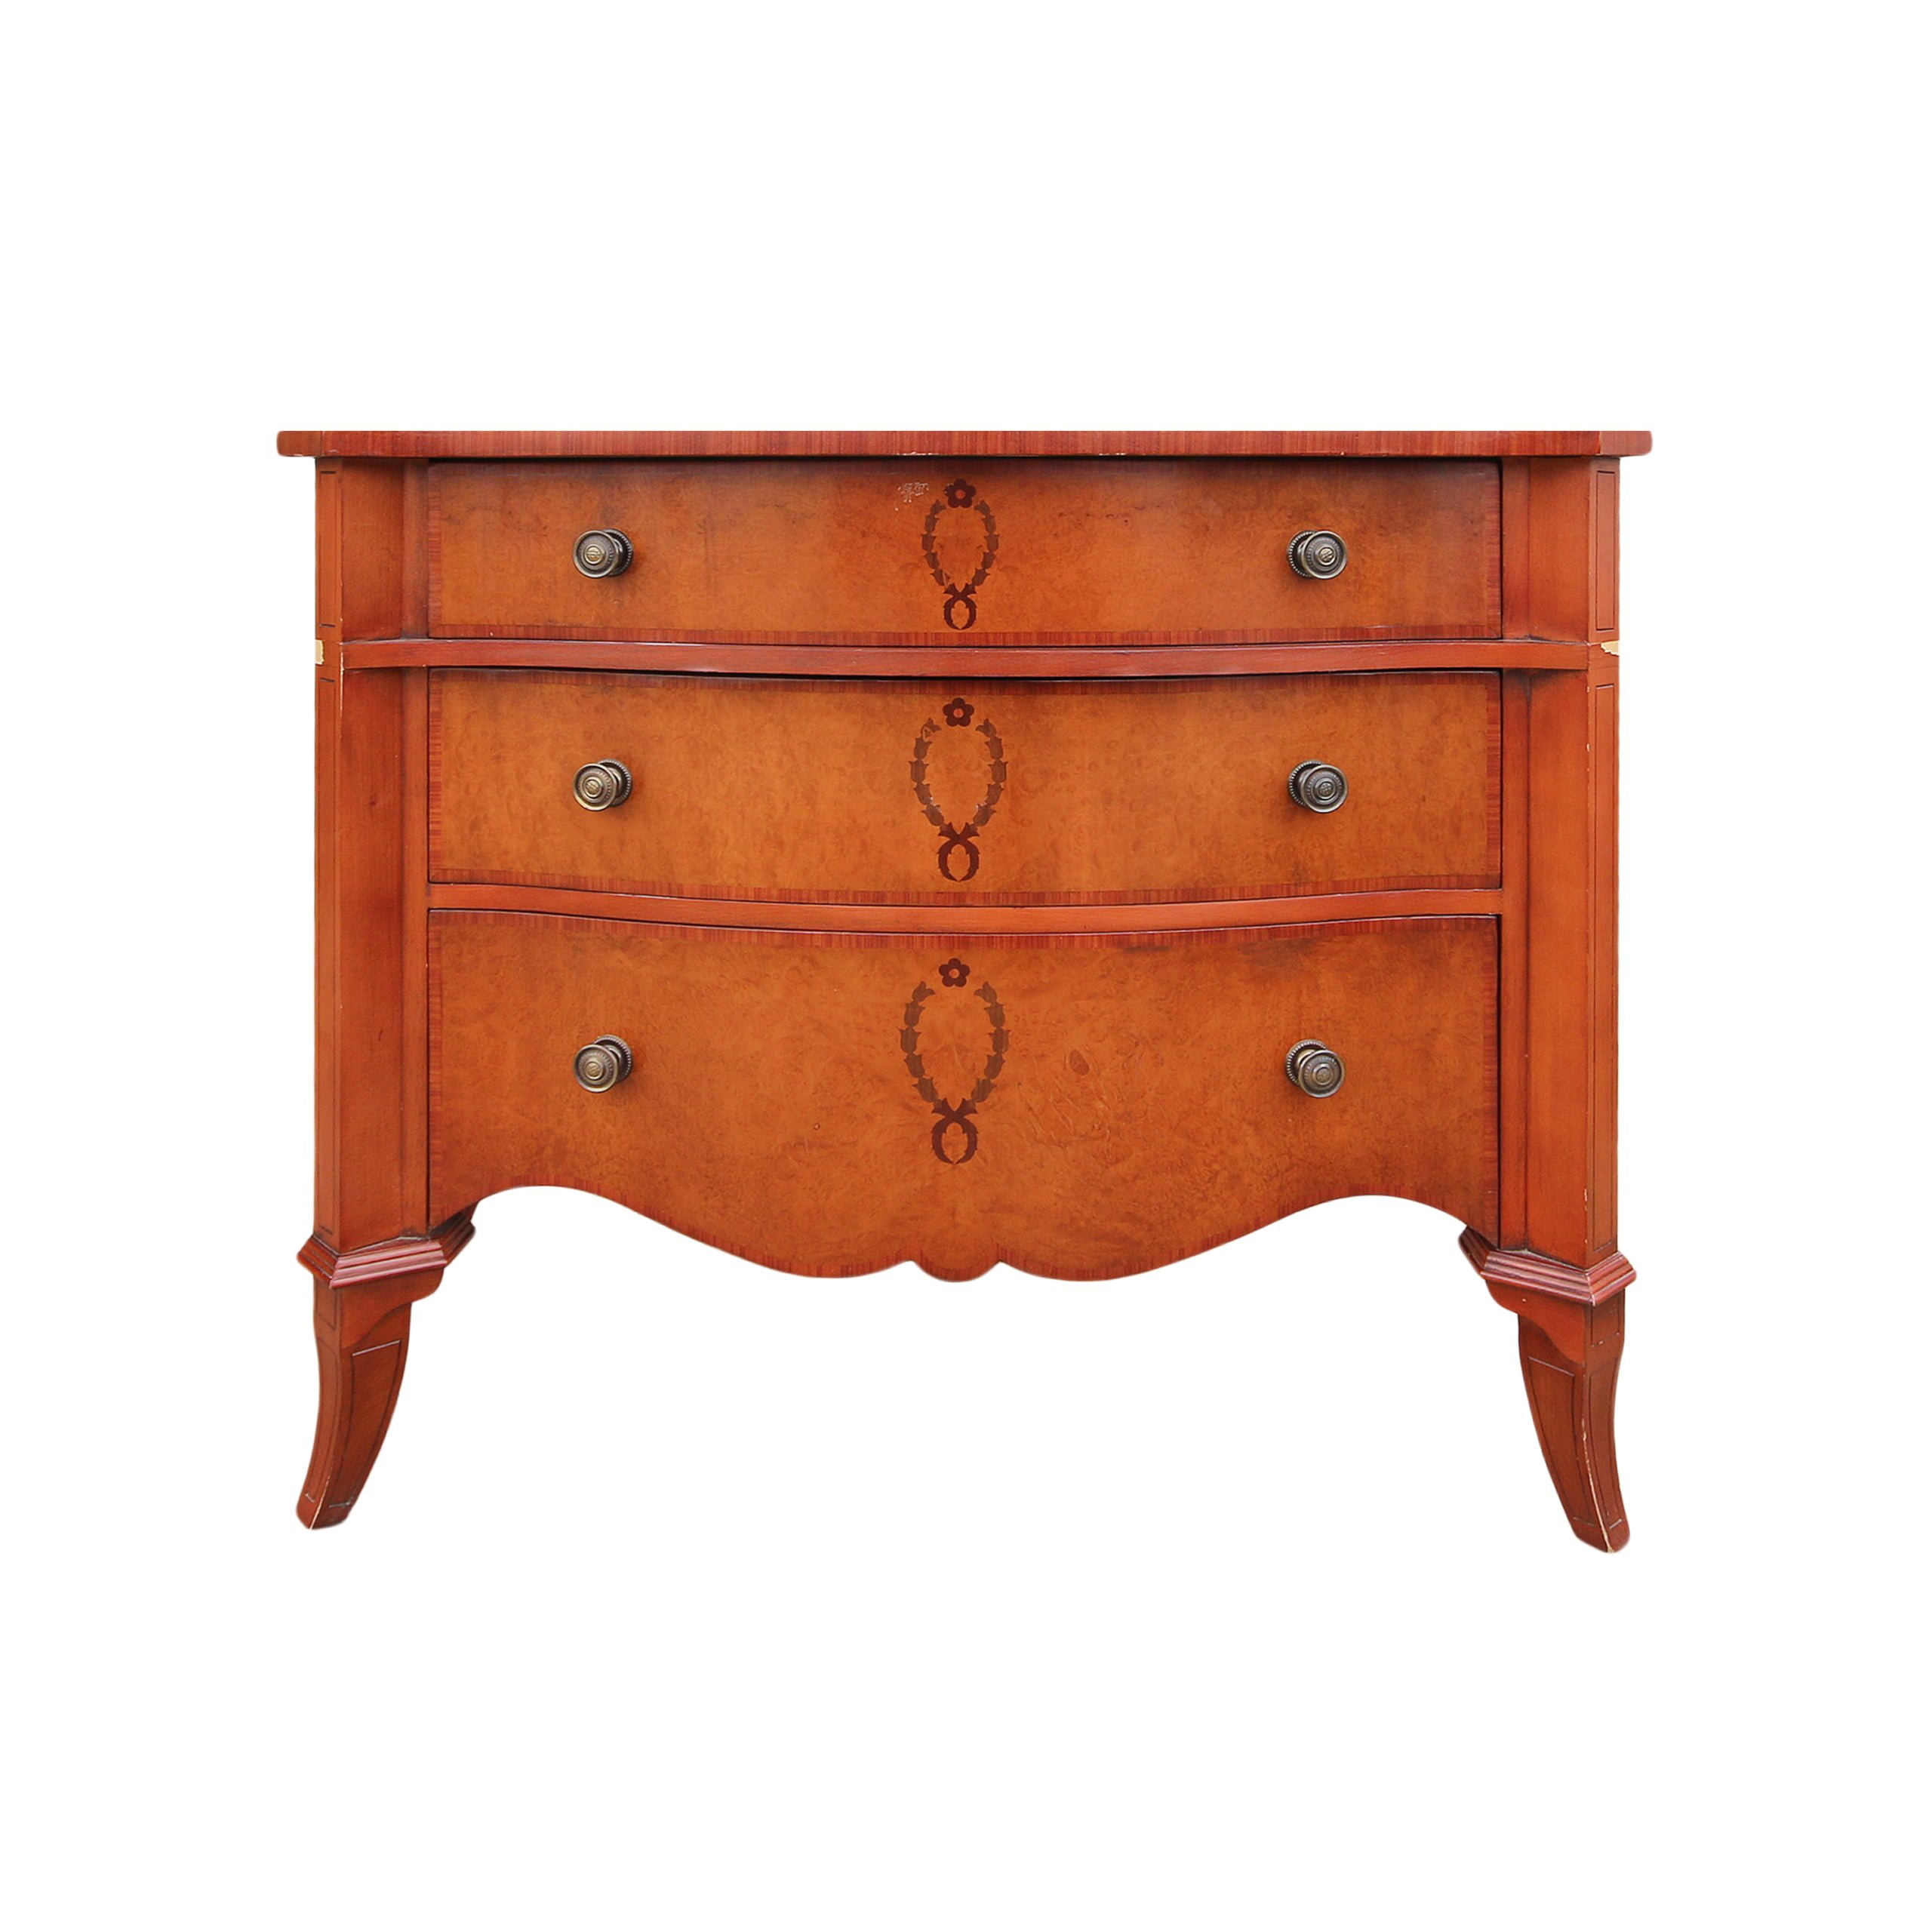 Inlaid commode chest of drawers